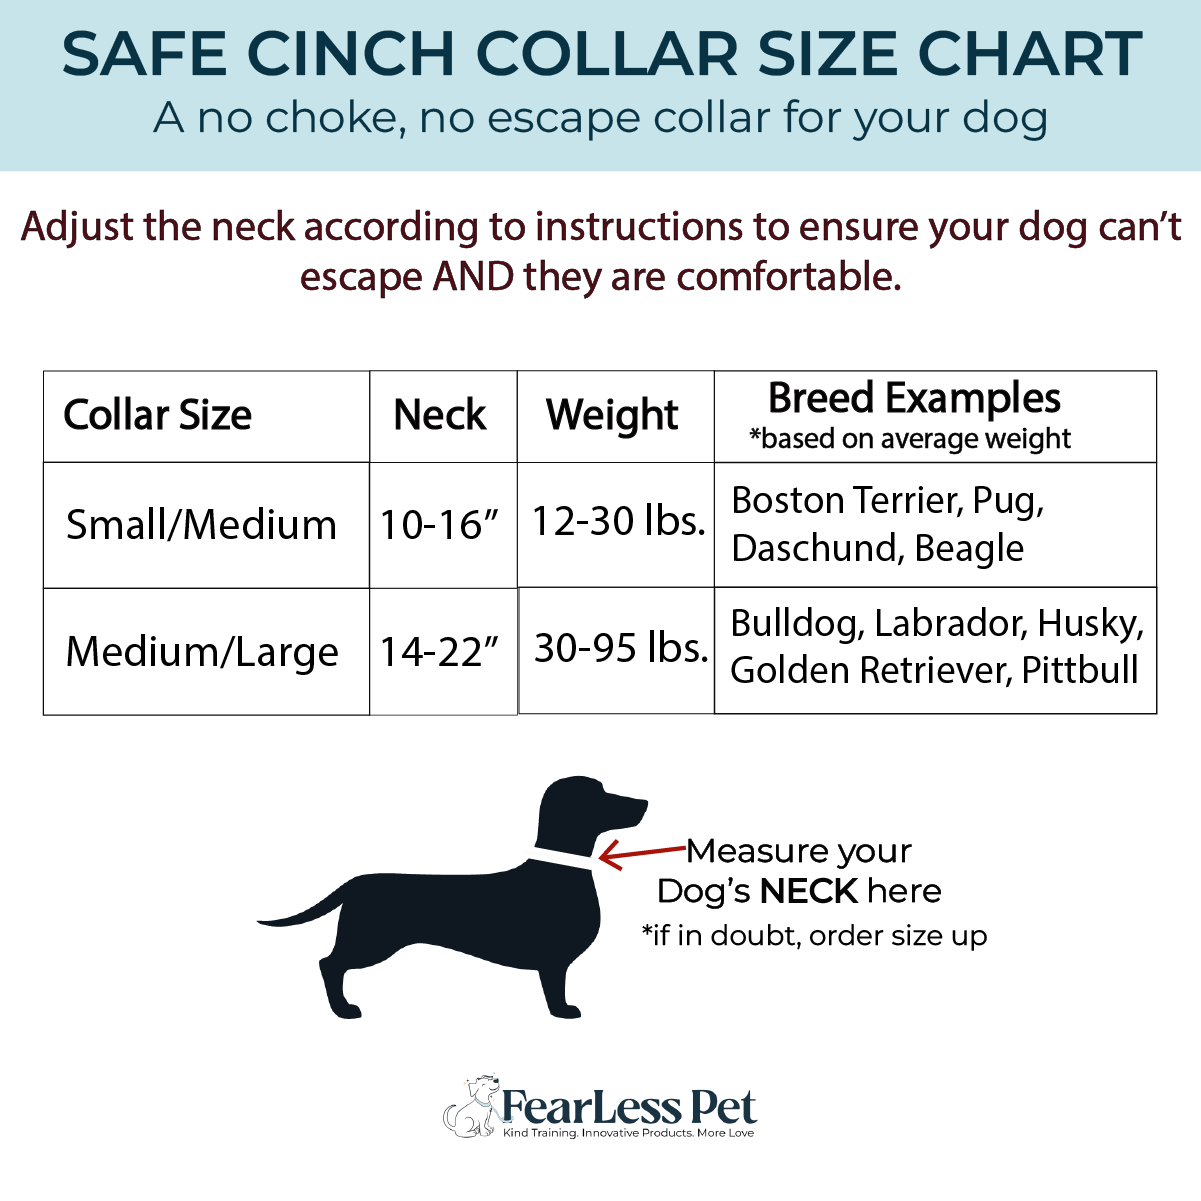 a size chart for a safe cinch no escape dog collar for small, medium and large dogs by fearless pet